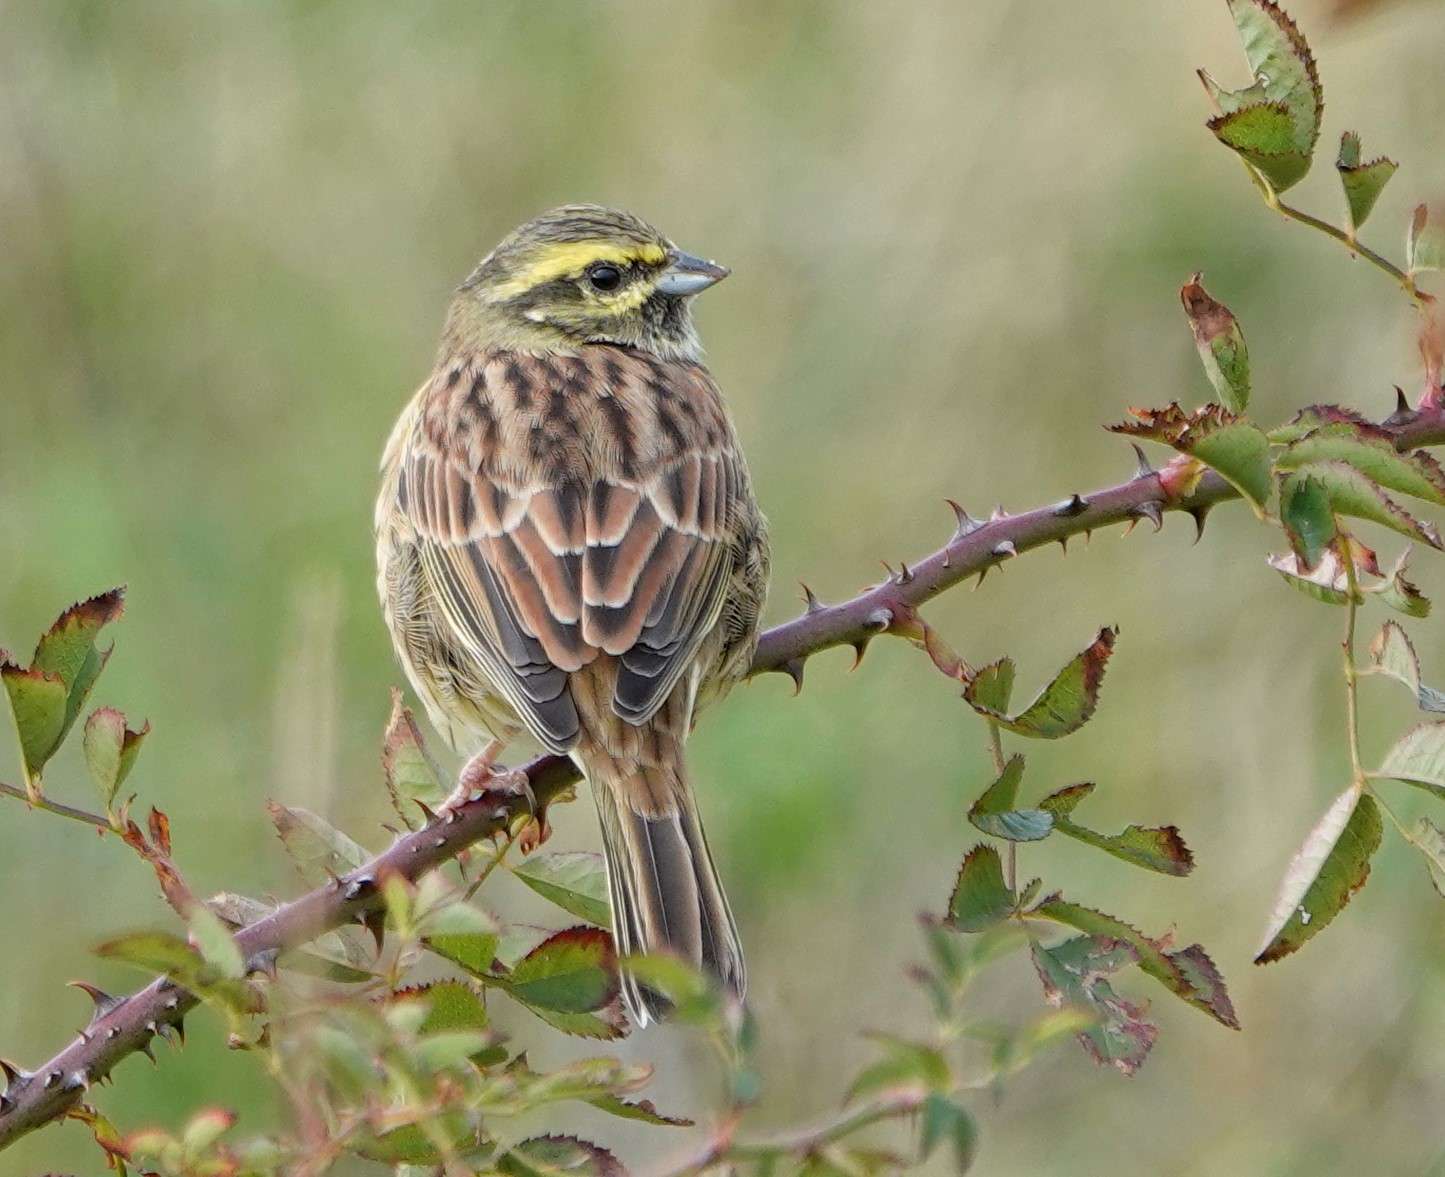 Cirl Bunting by Paul Howrihane at Berry Head